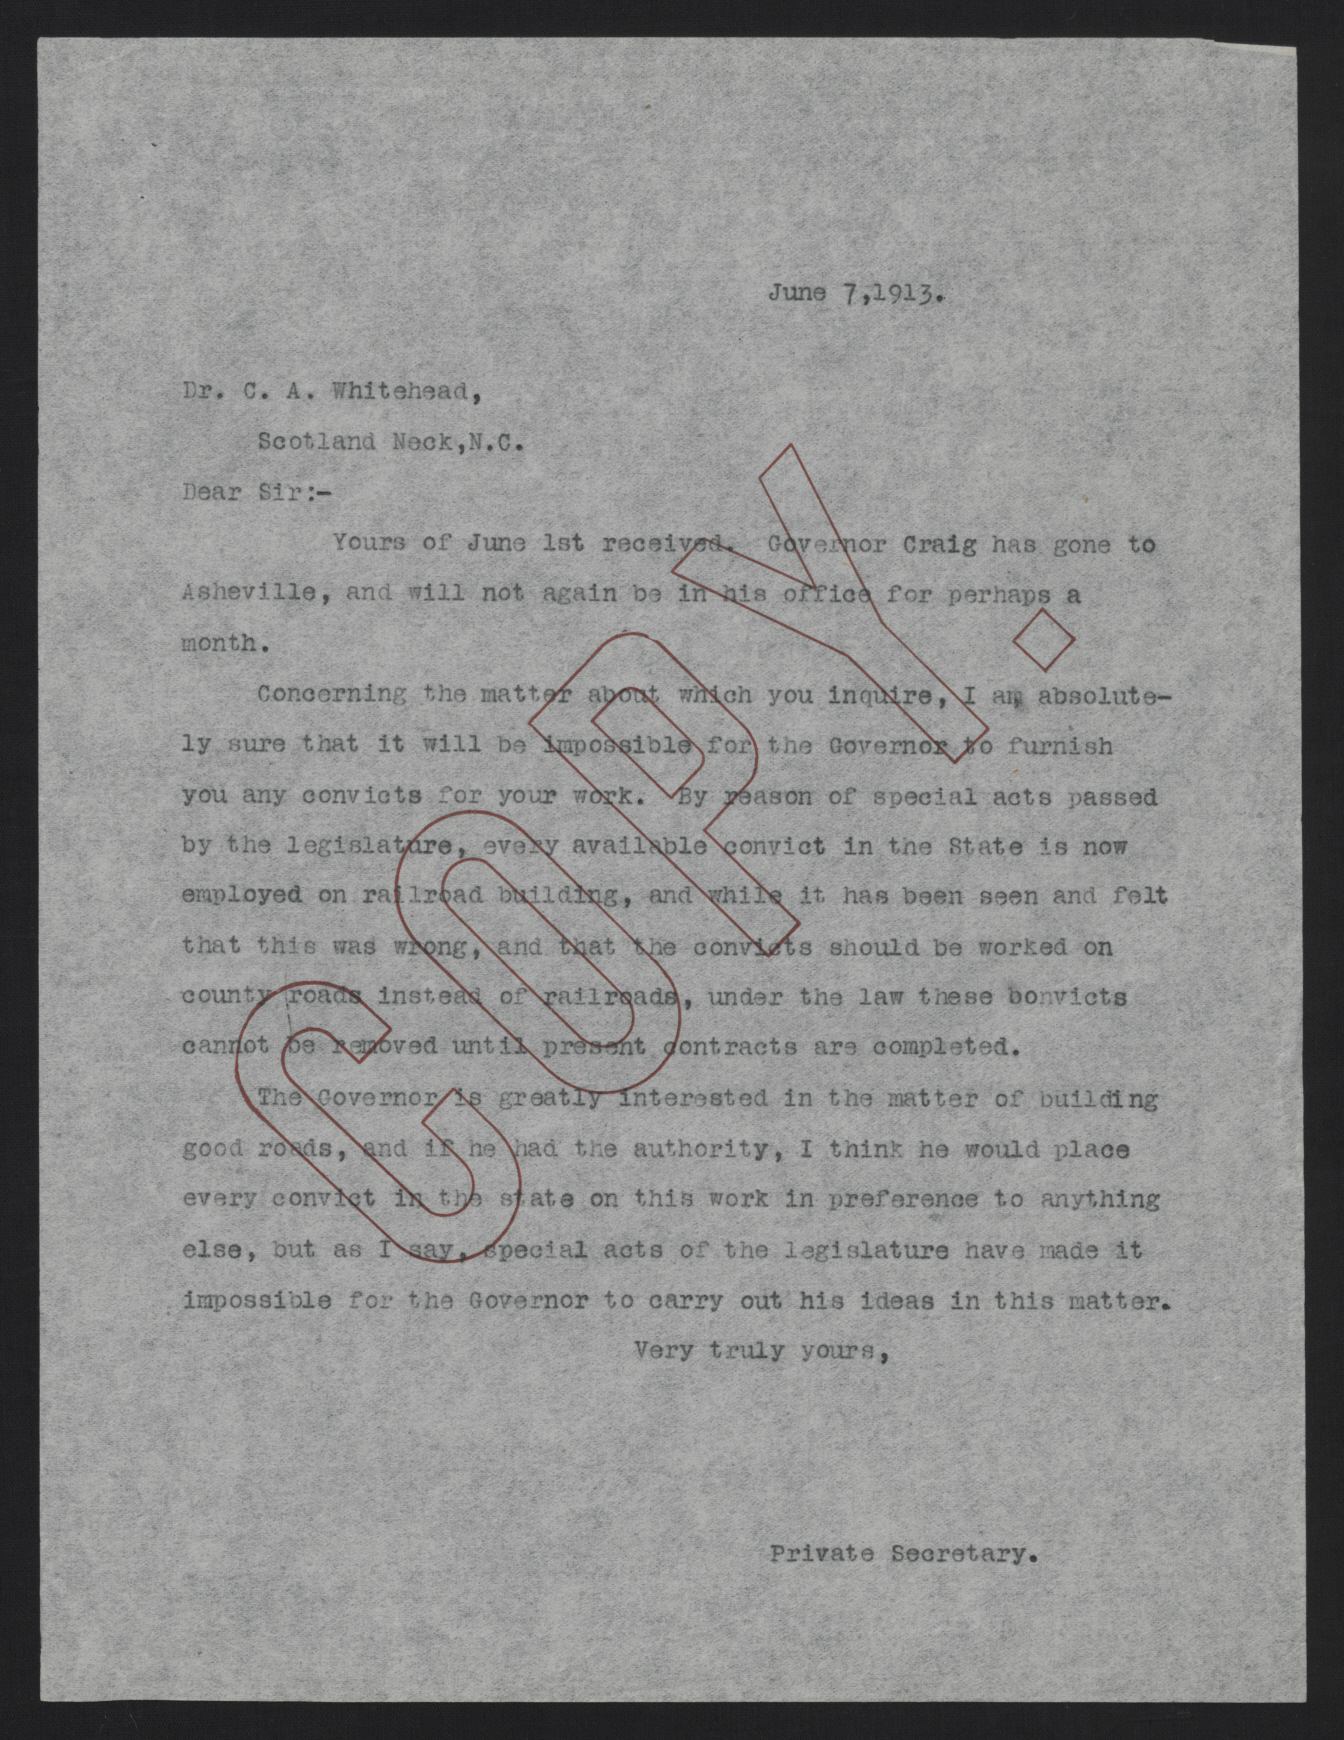 Letter from Kerr to Whitehead, June 7, 1913